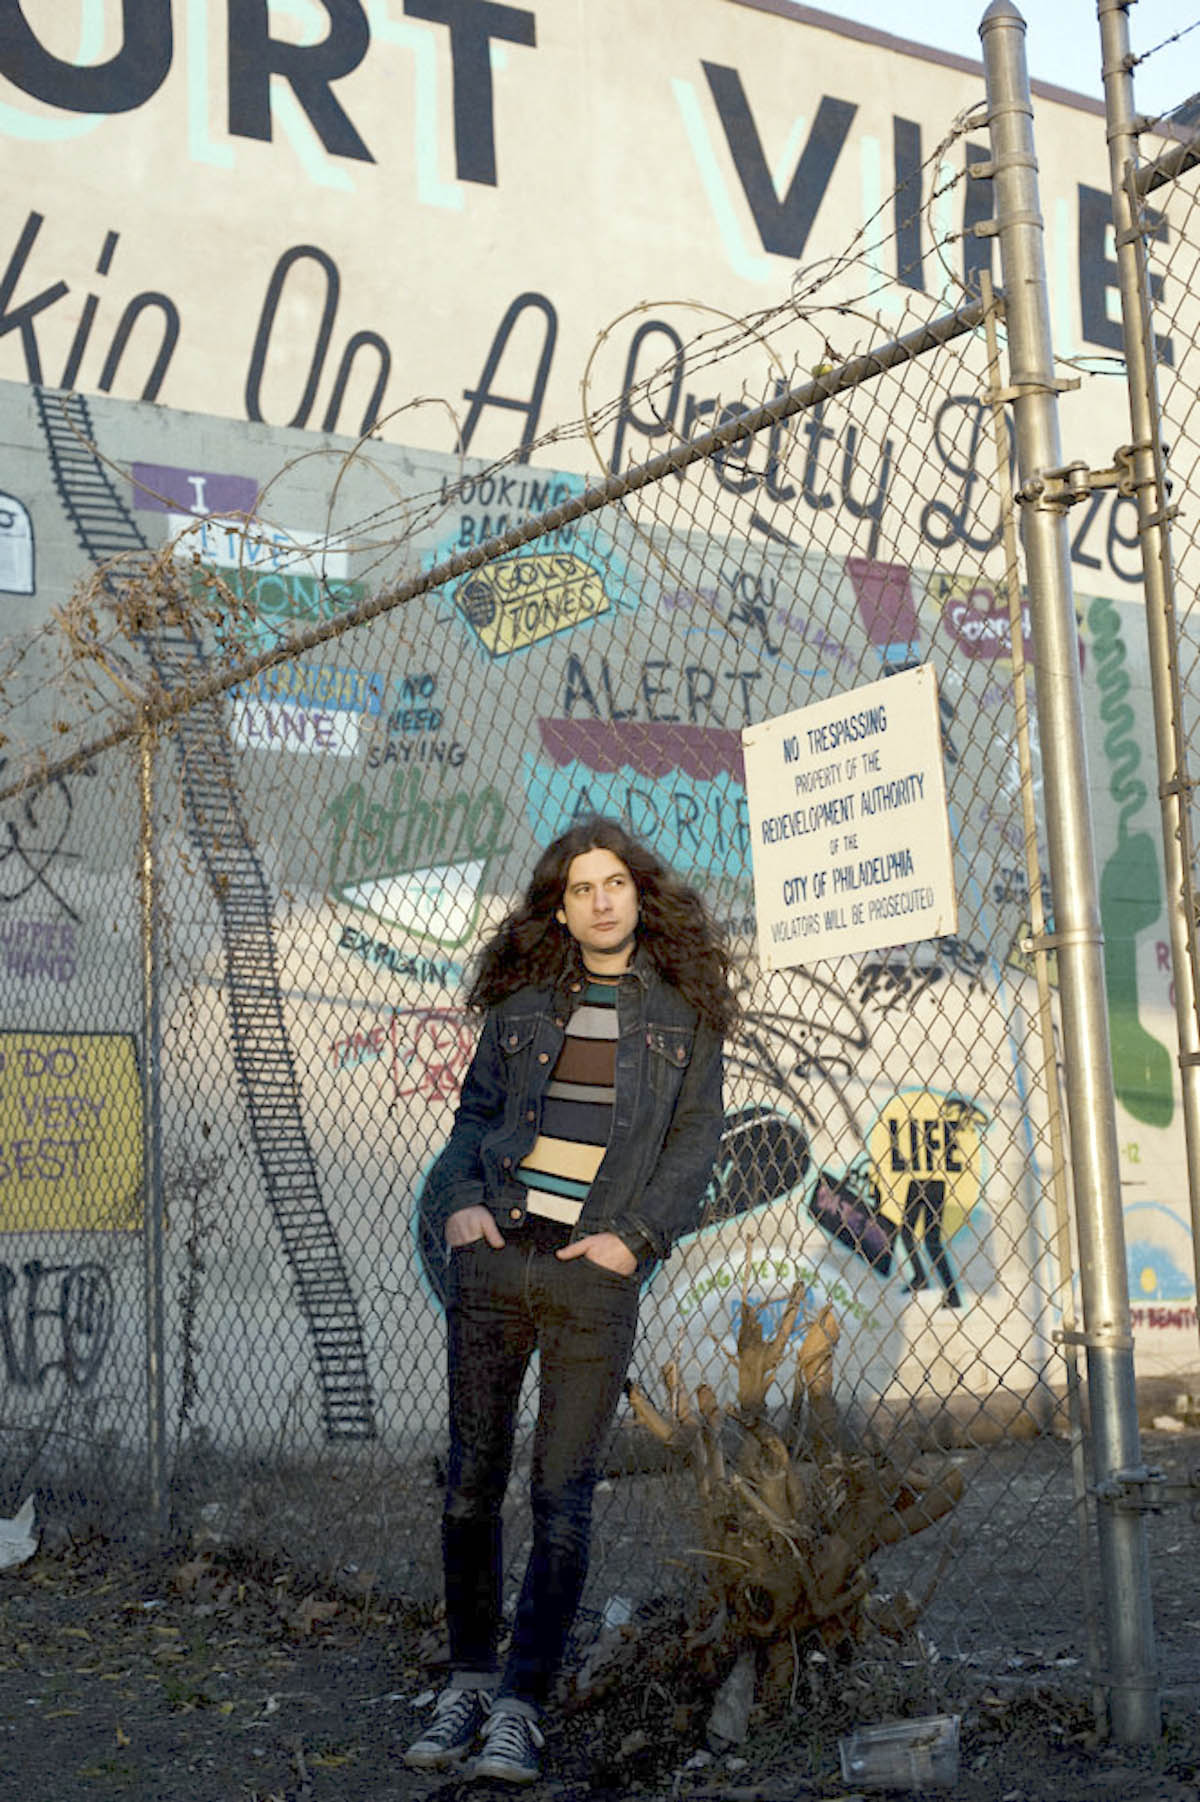 Though singer/songwriter Kurt Vile has made a name from his solo catalog—heavy